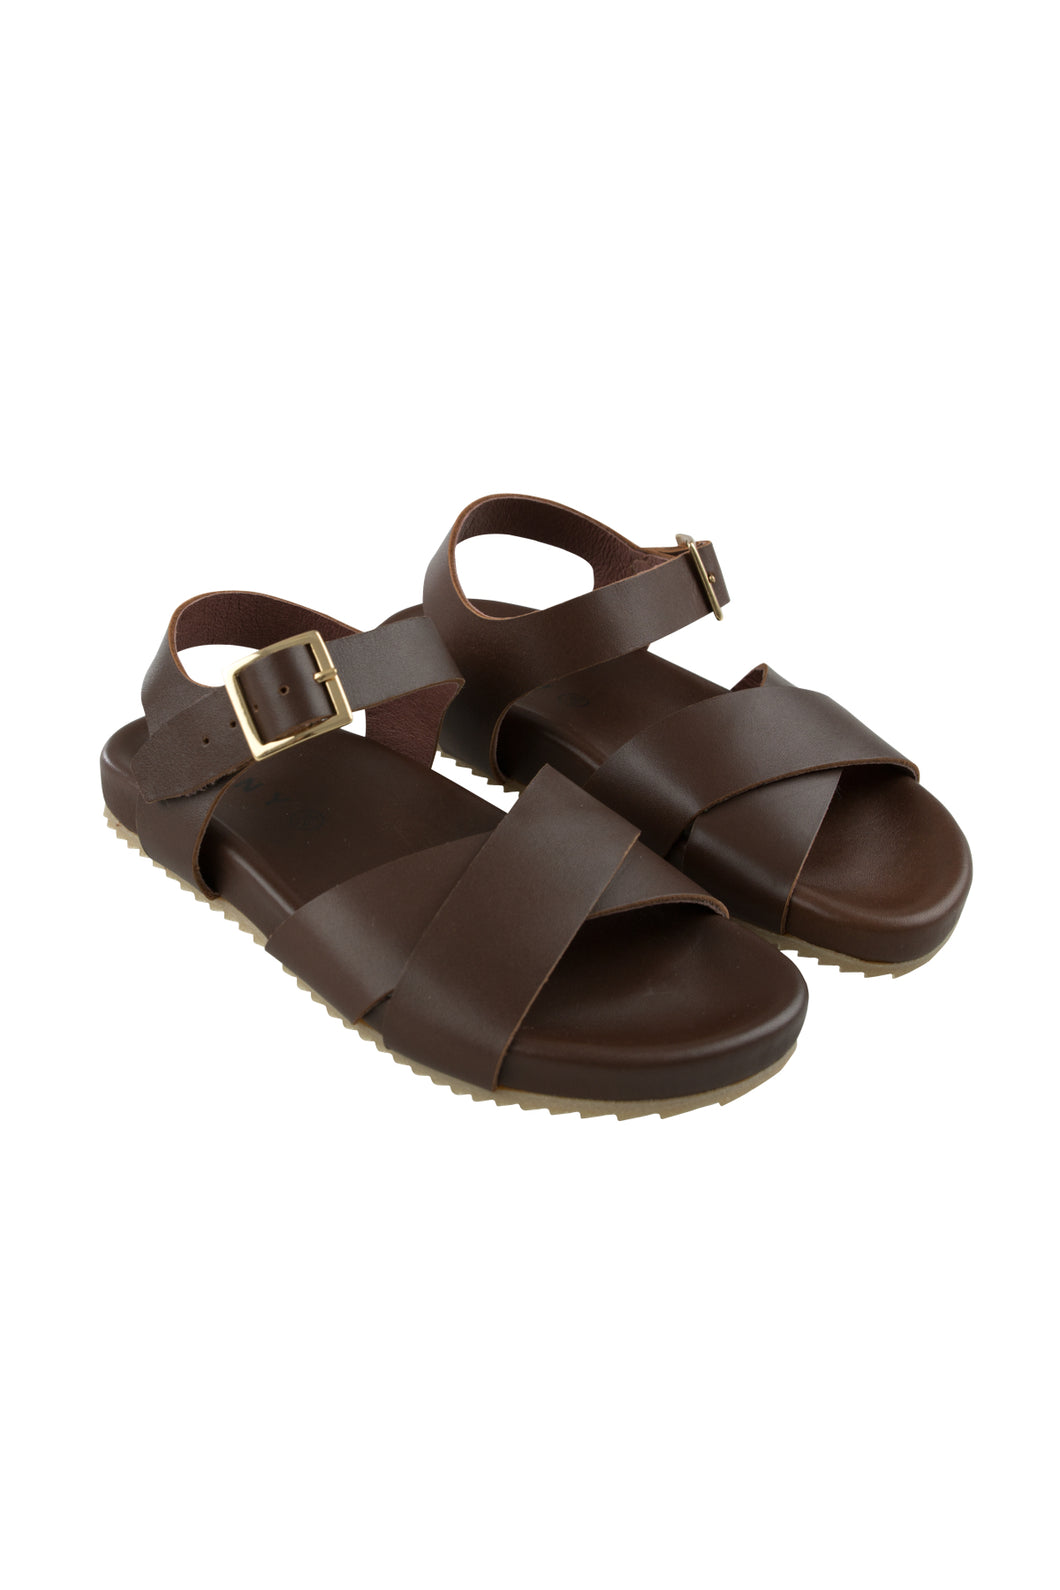 Tinycottons LEATHER CROSSED Sandals Dark brown